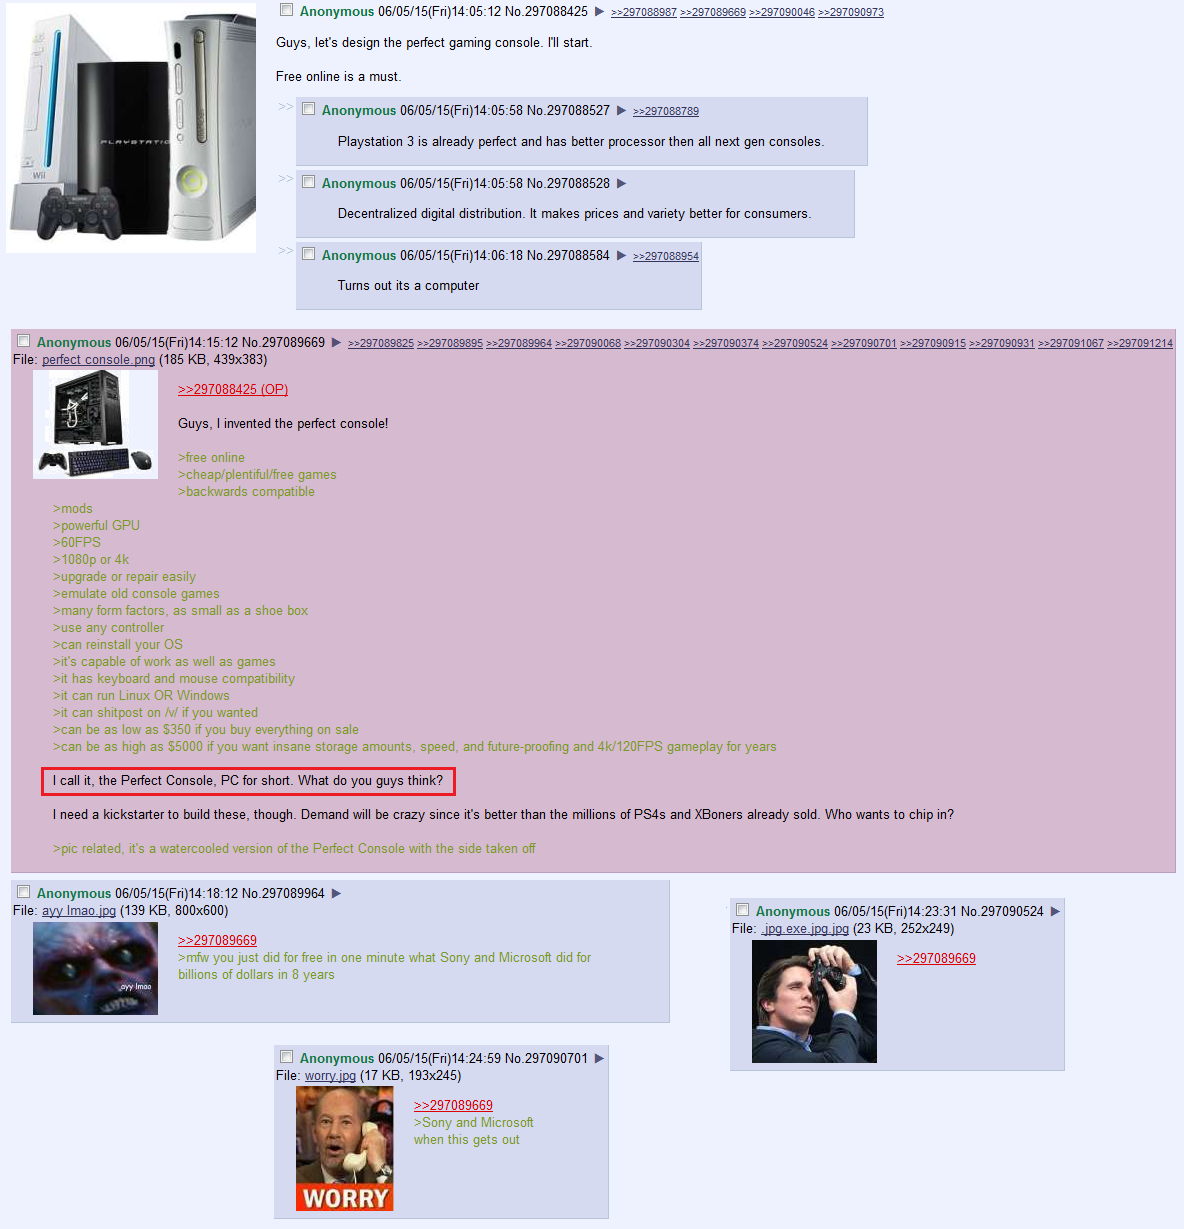 /v/ designs the perfect gaming console